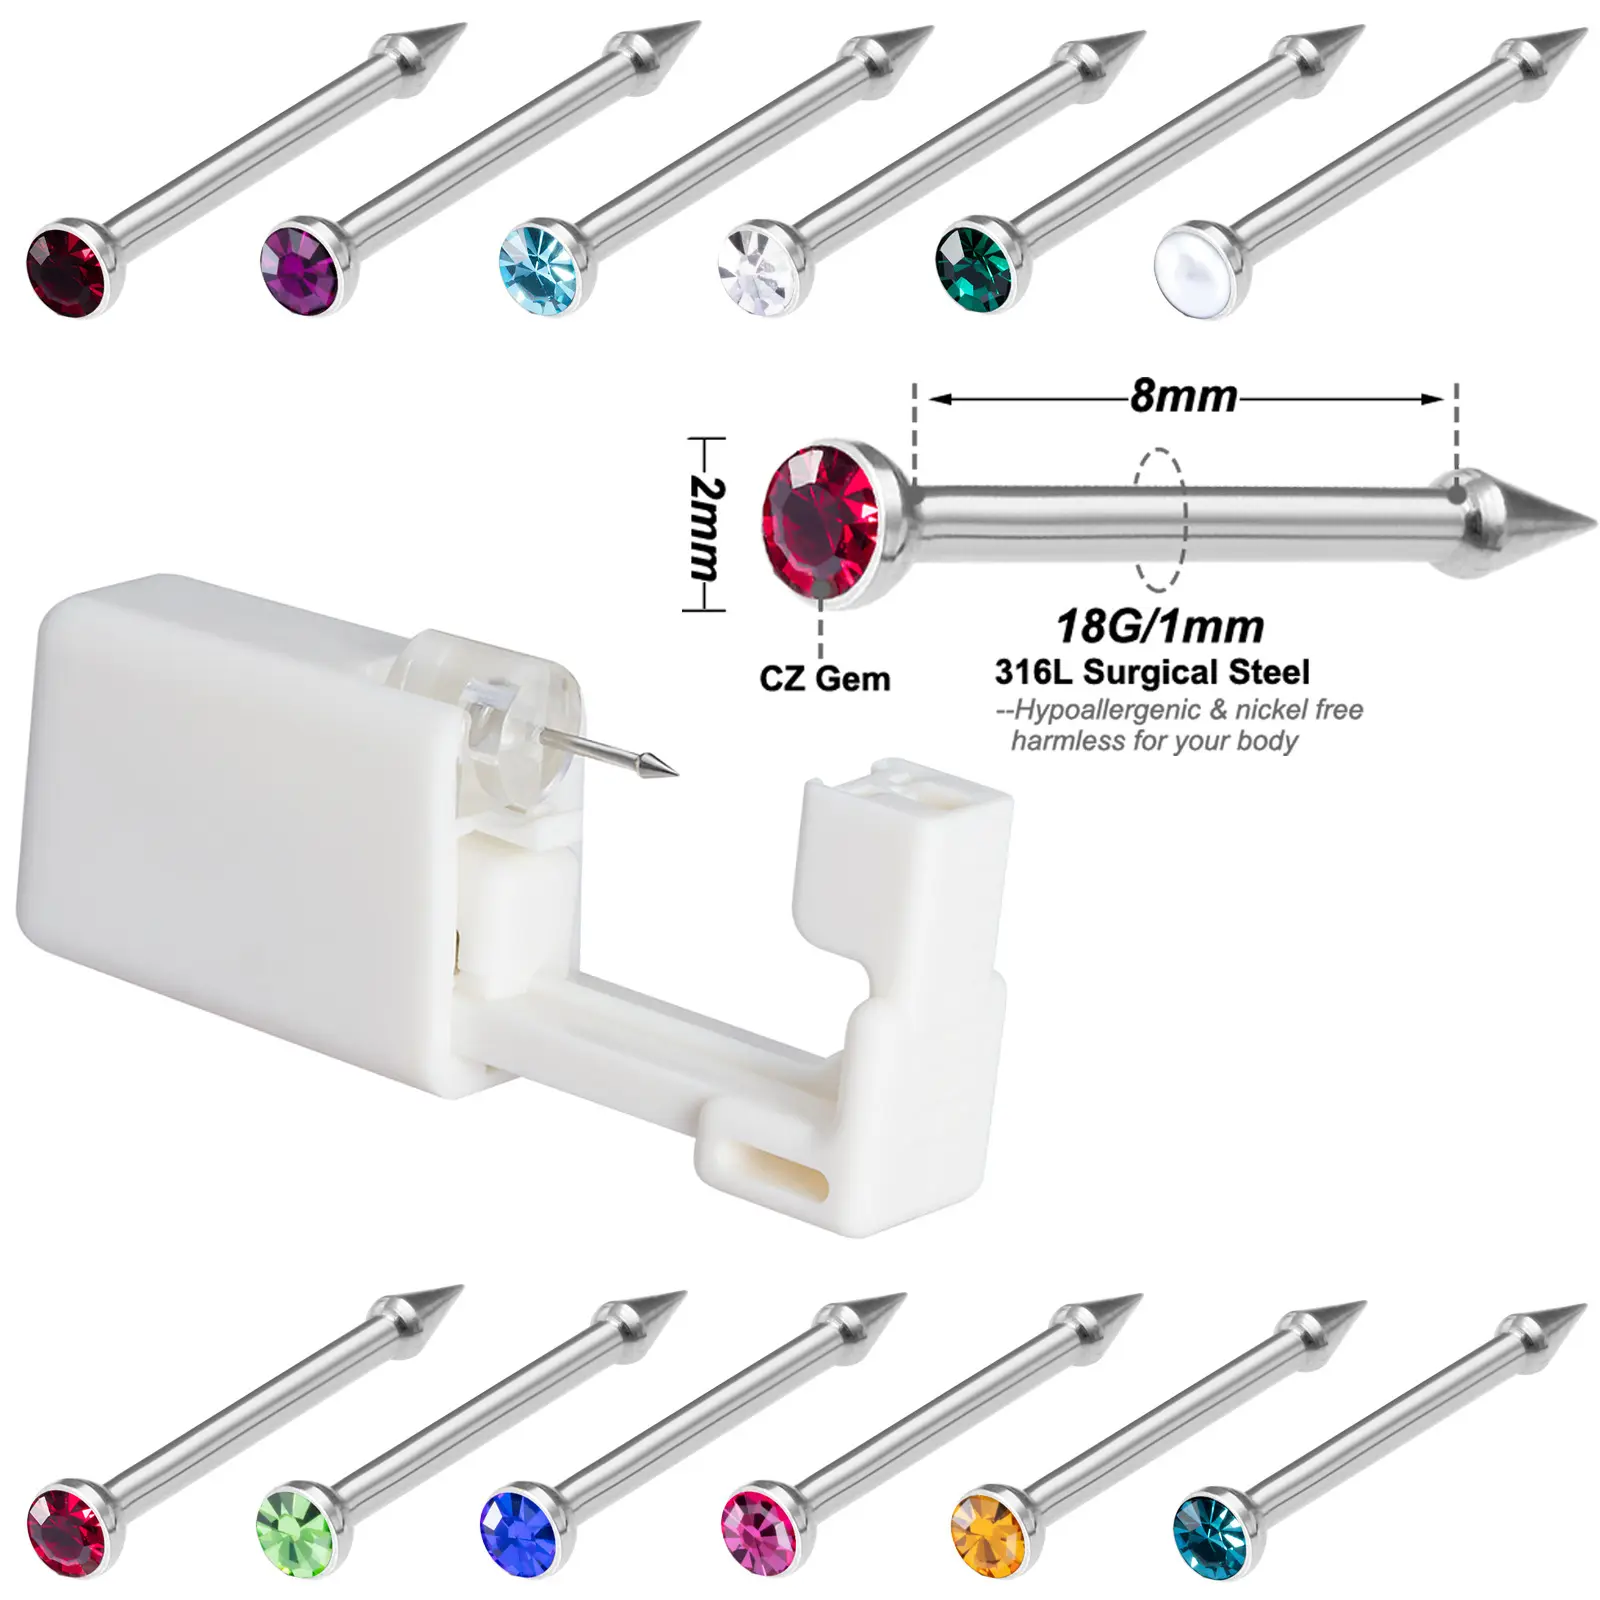 POENNIS One-time Disposable Sterilized Ear Piercing Studs With Birthstone Nose Stud Ear Body Piercing Kit Gun tool Sets